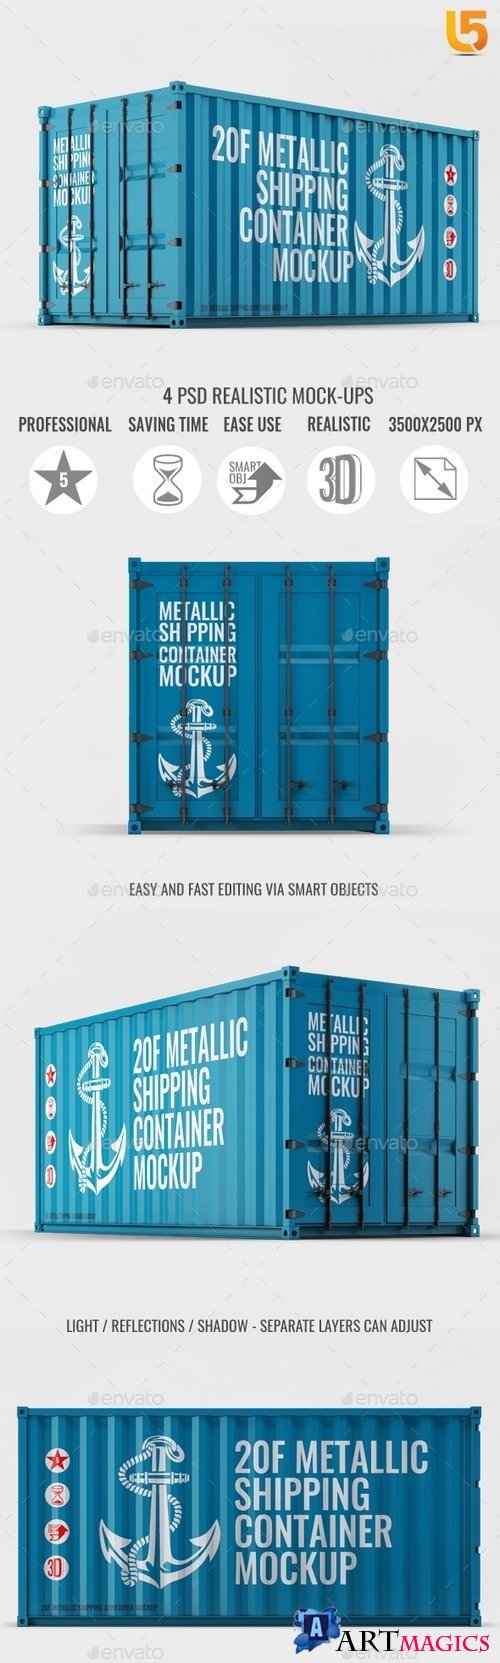 Shipping Container Mock-Up - 21074388